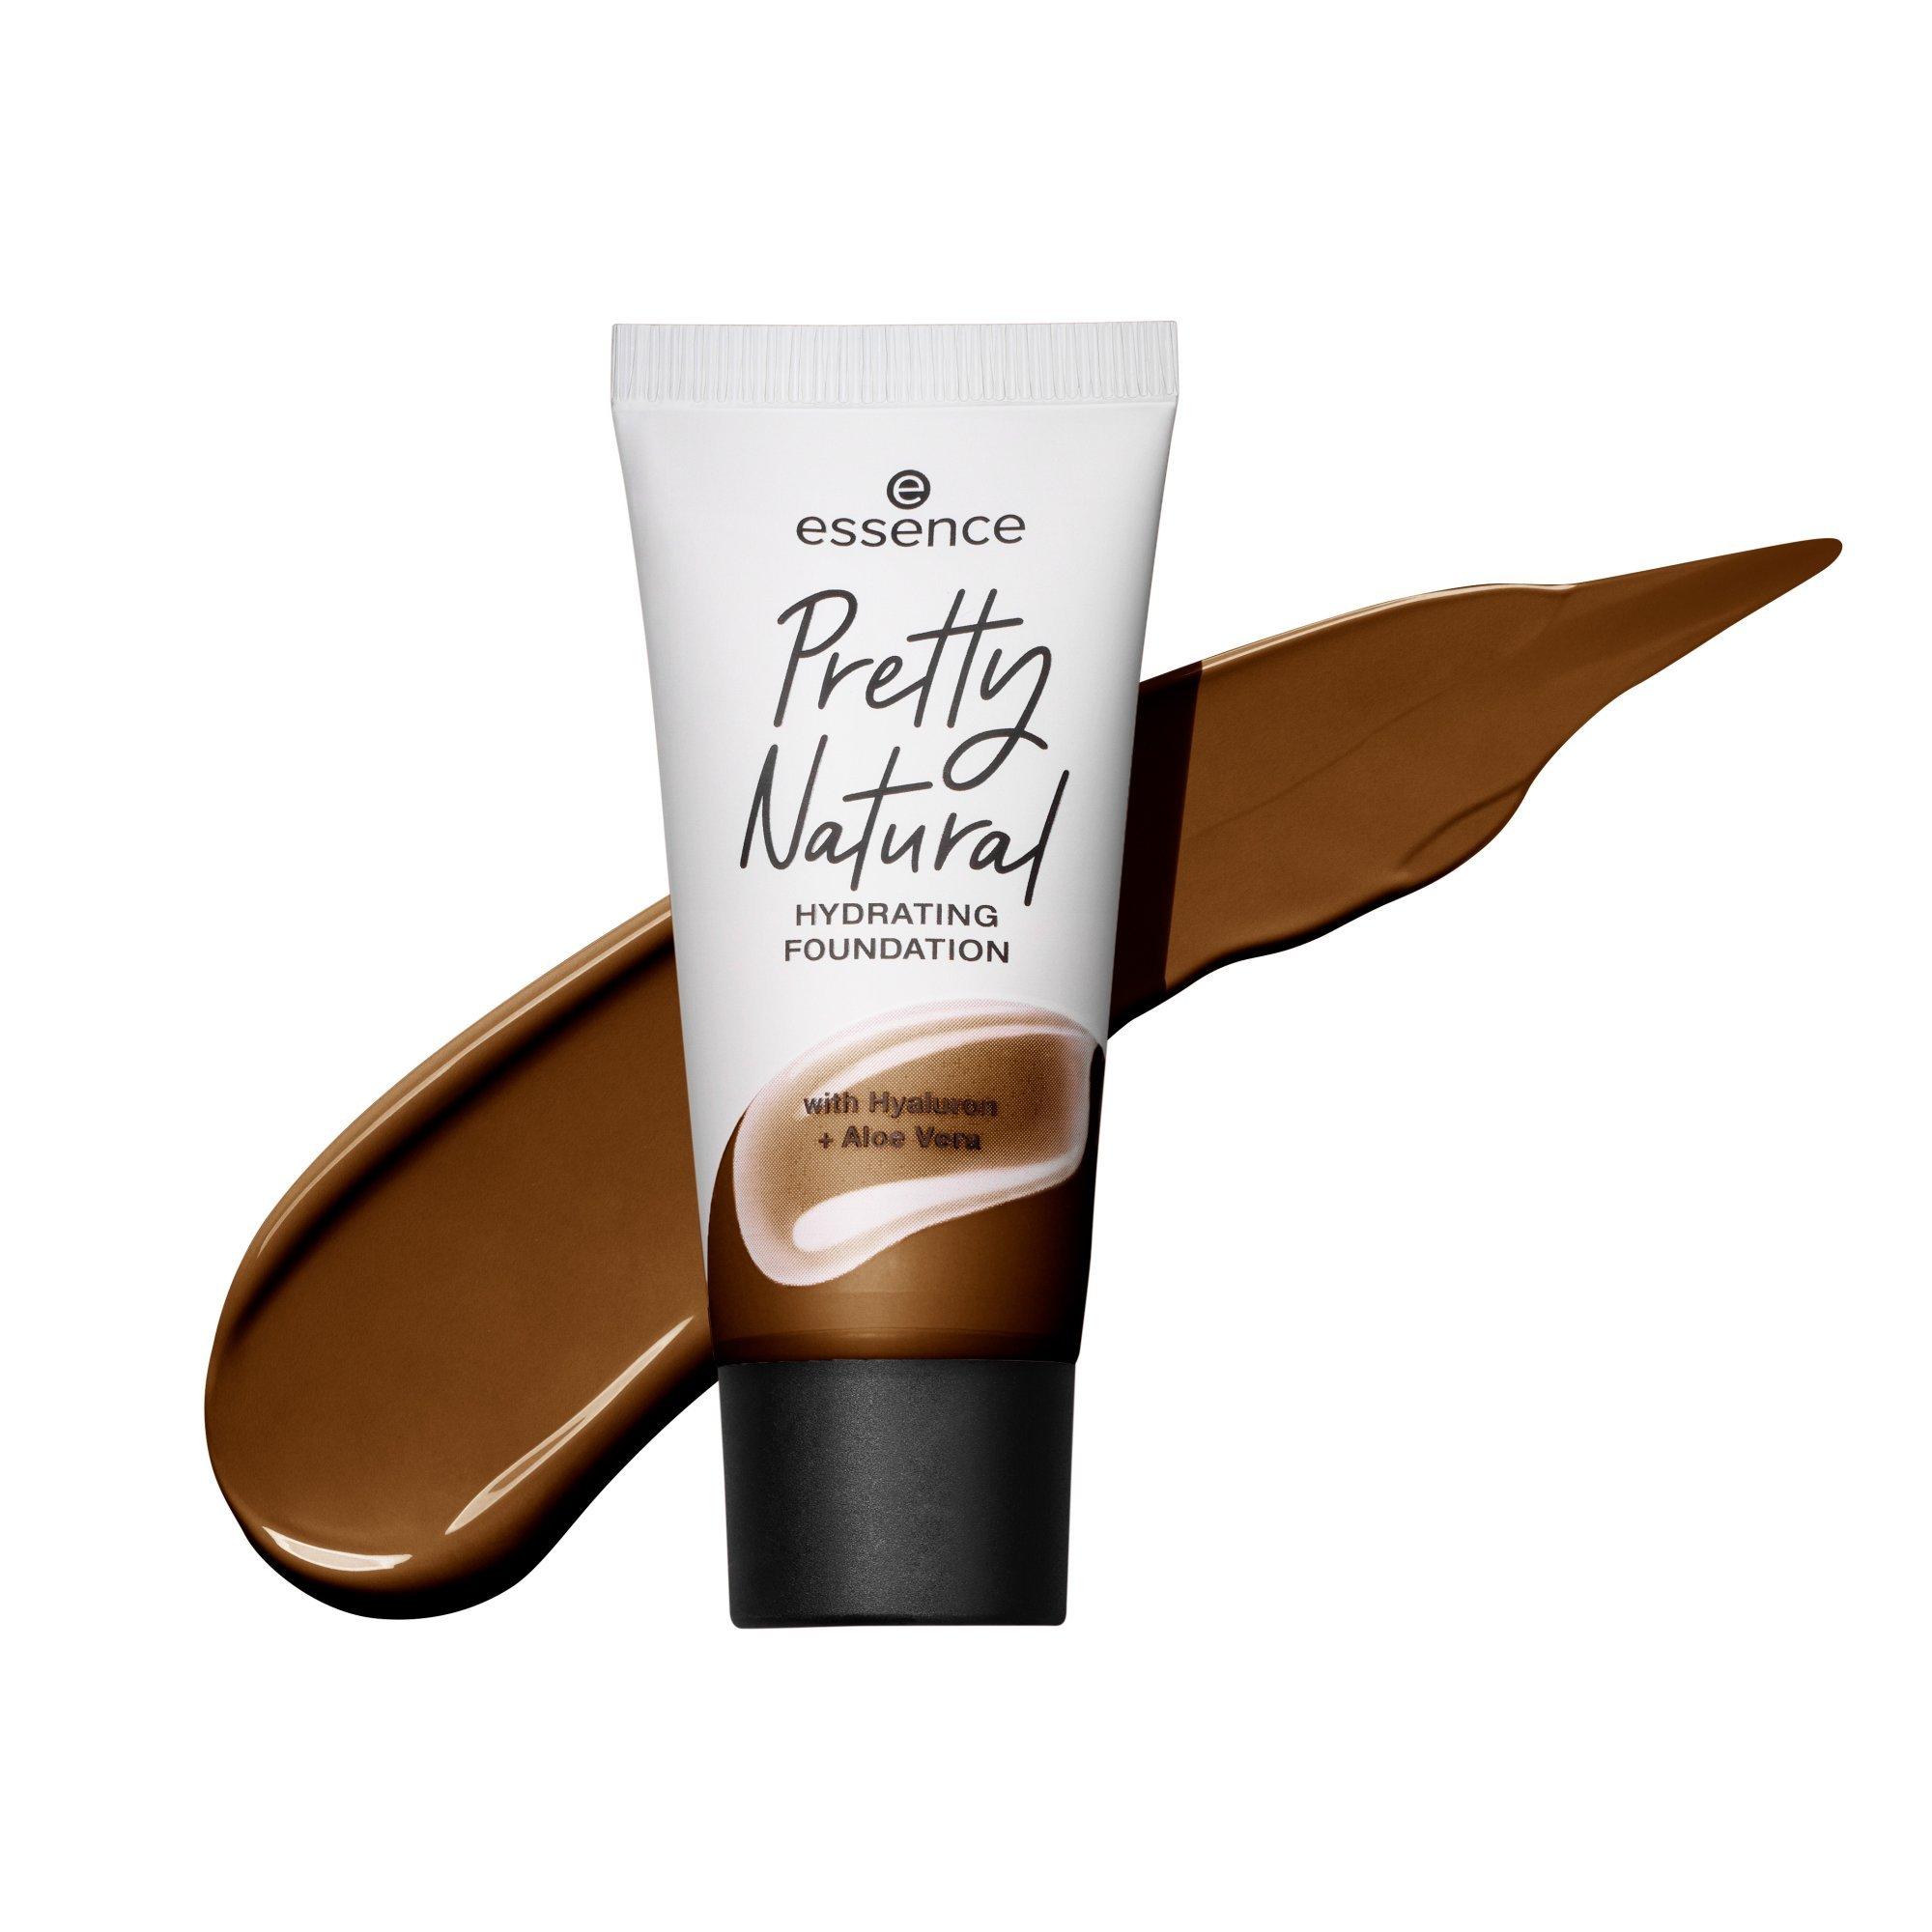 Pretty Natural HYDRATING FOUNDATION